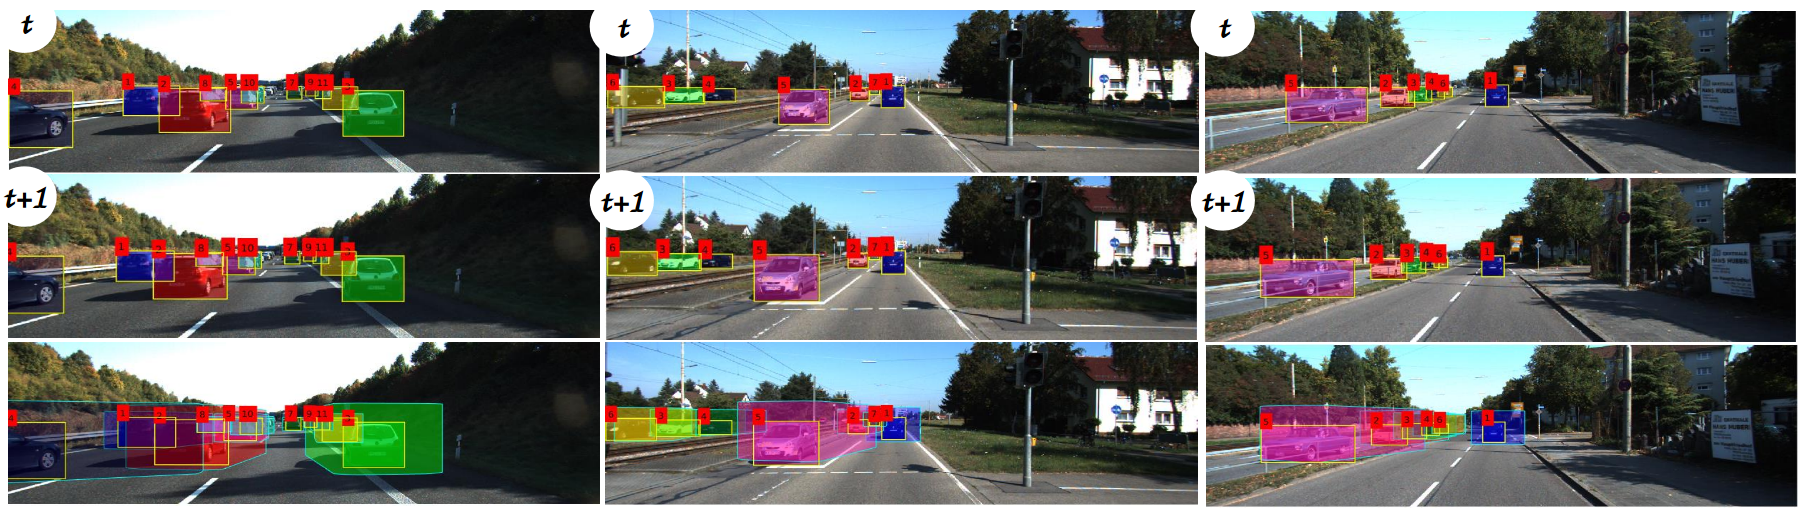 Sample multi-object tracking results from our approach when evaluated on the KITTI dataset.